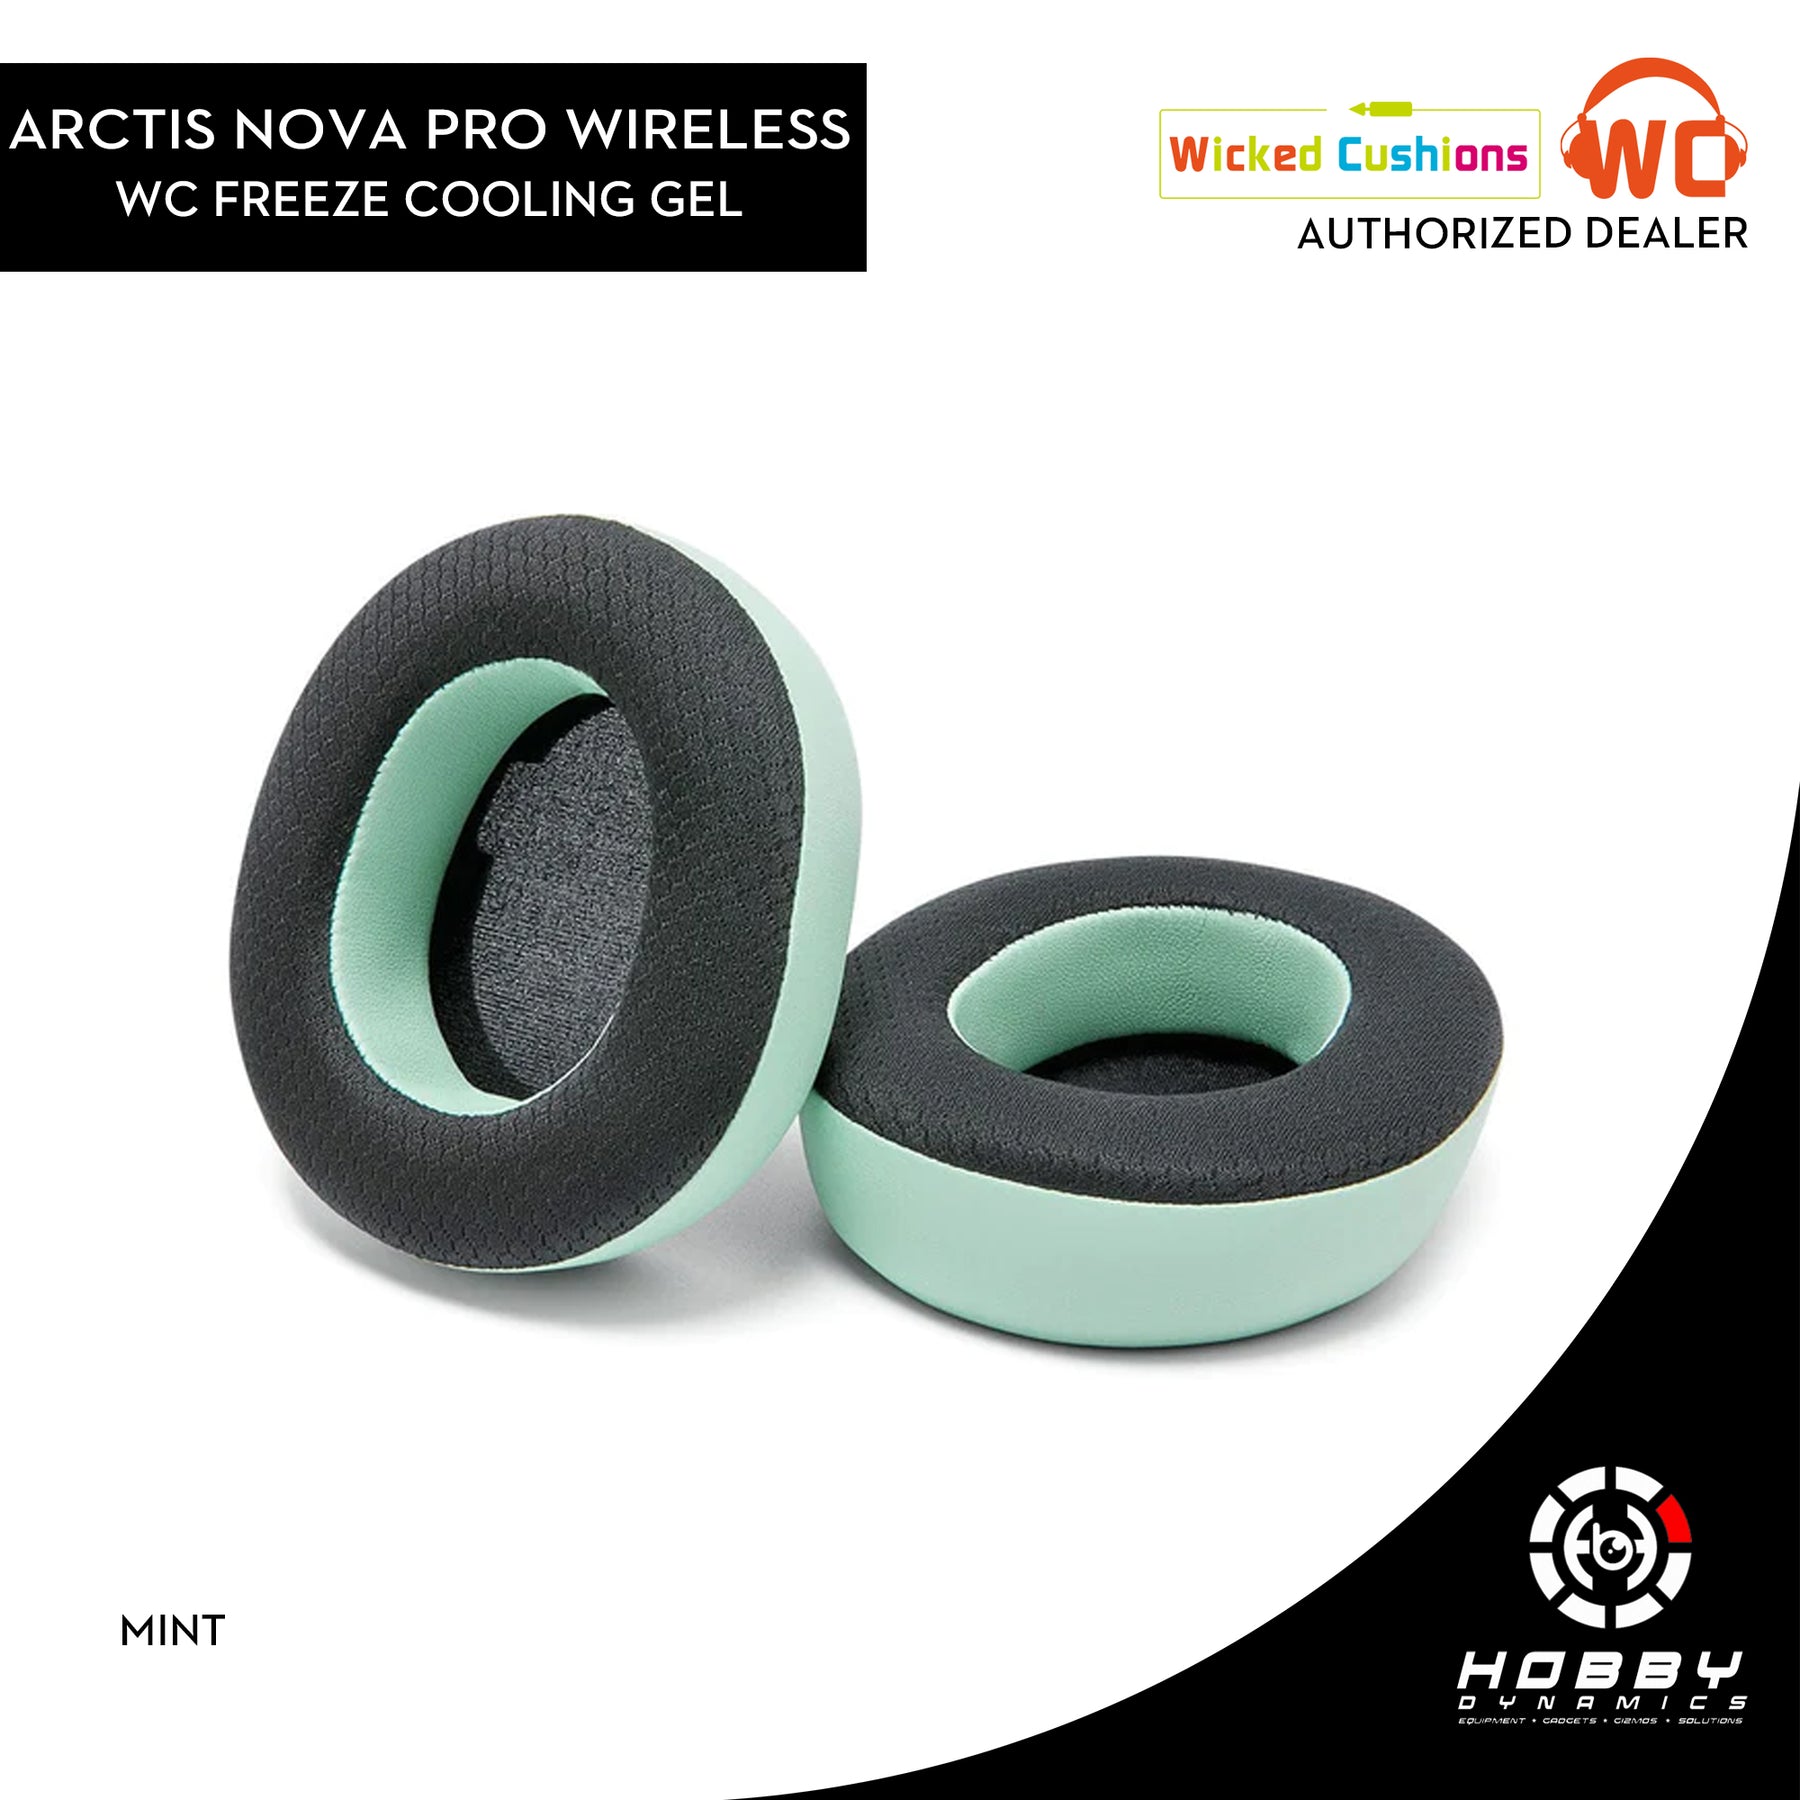 Big thanks for Wicked Cushions fixing the god awful comfort issues of the  Nova pro wireless. Ears no longer touch the nub, cups are deeper and wider.  The cooling gel was a